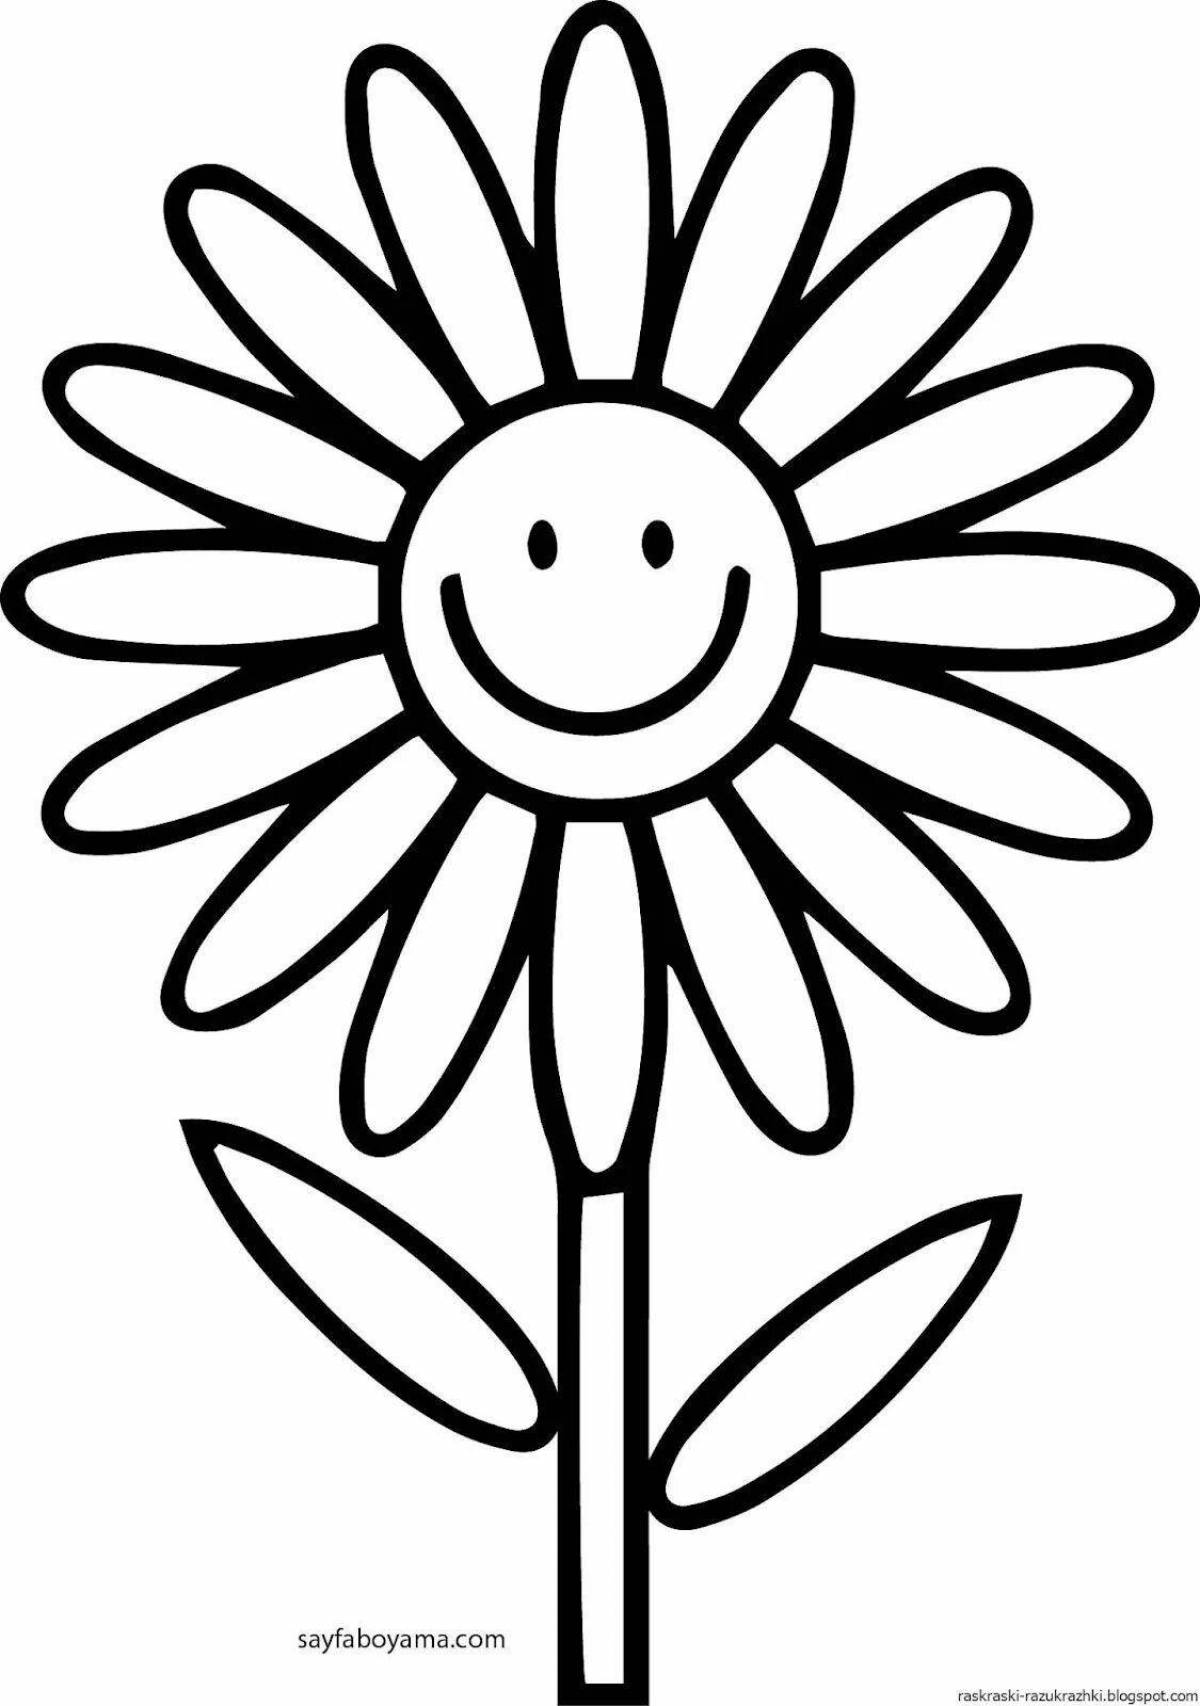 Gorgeous daisy flower coloring book for kids